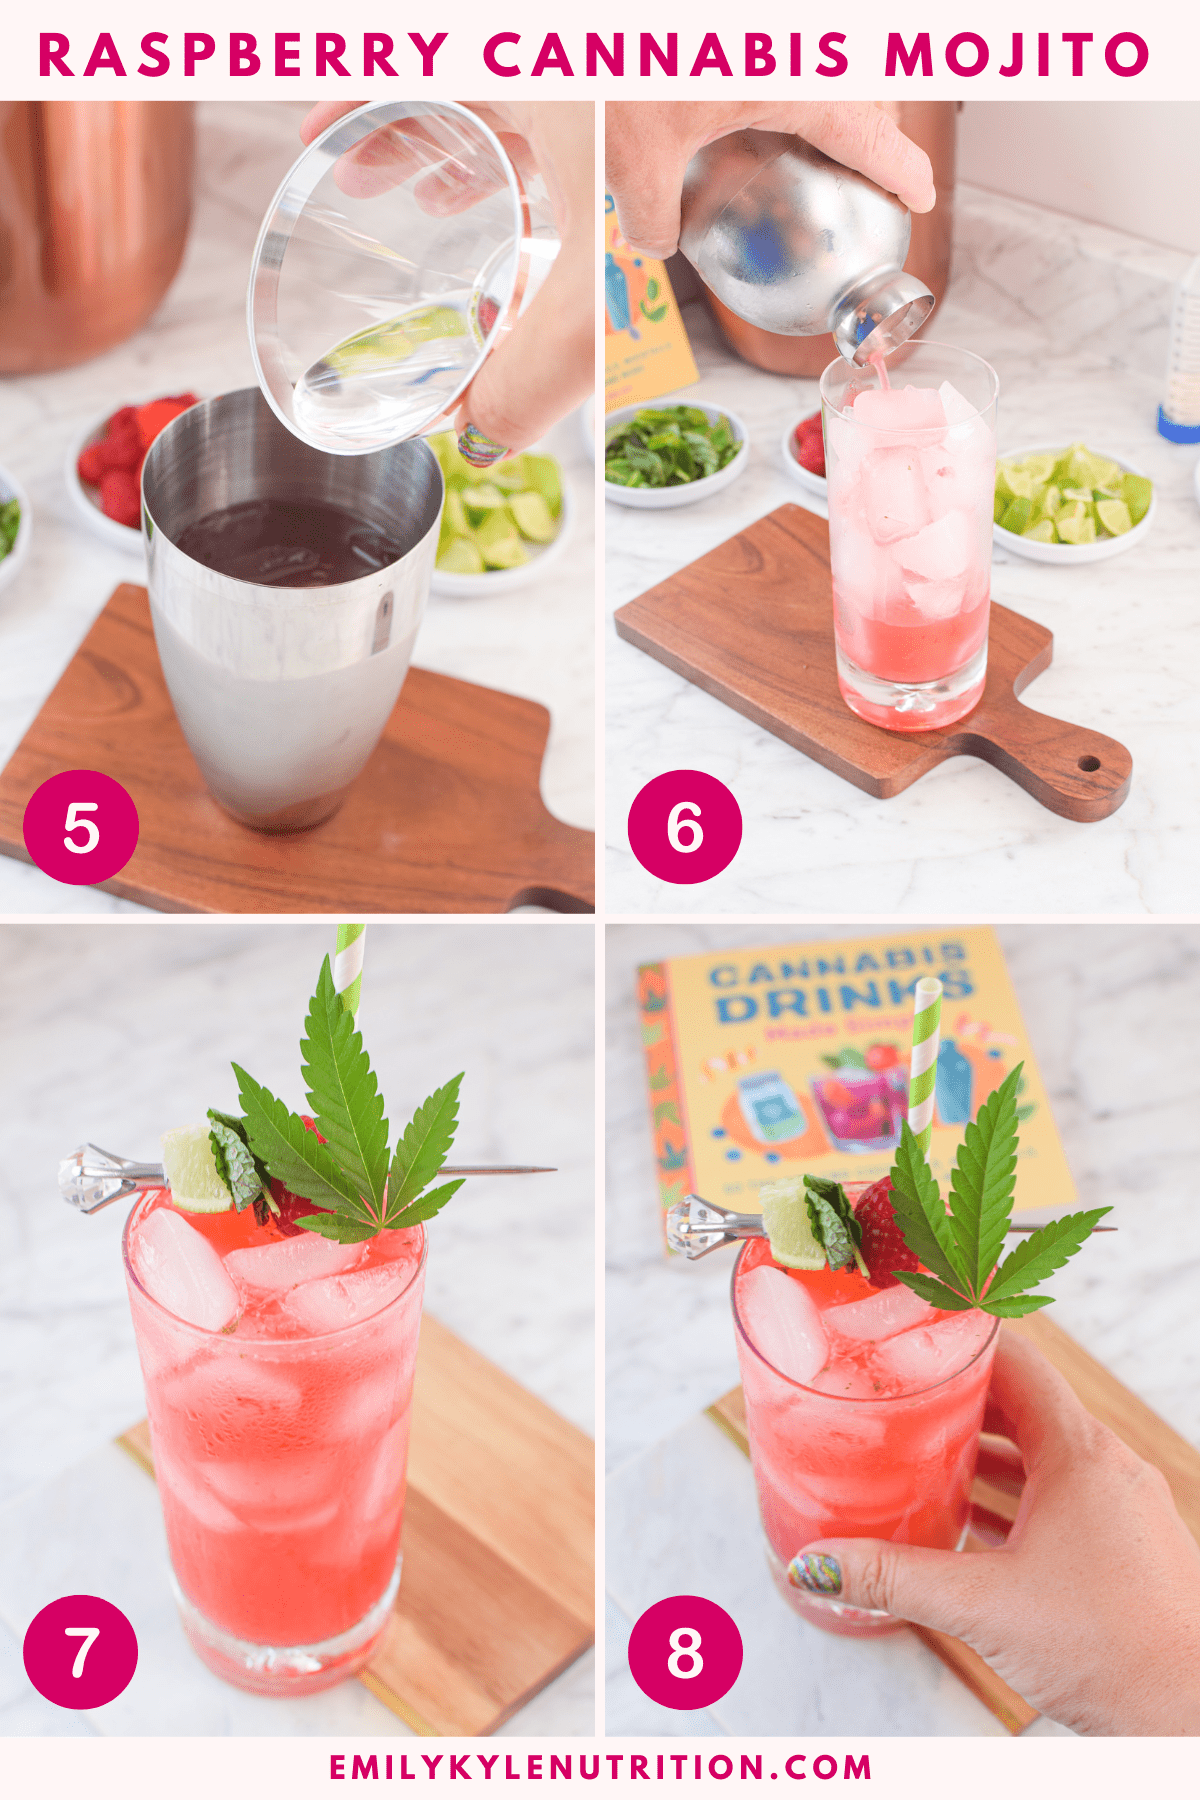 A four step image collage showing how to make a raspberry cannabis mojito.